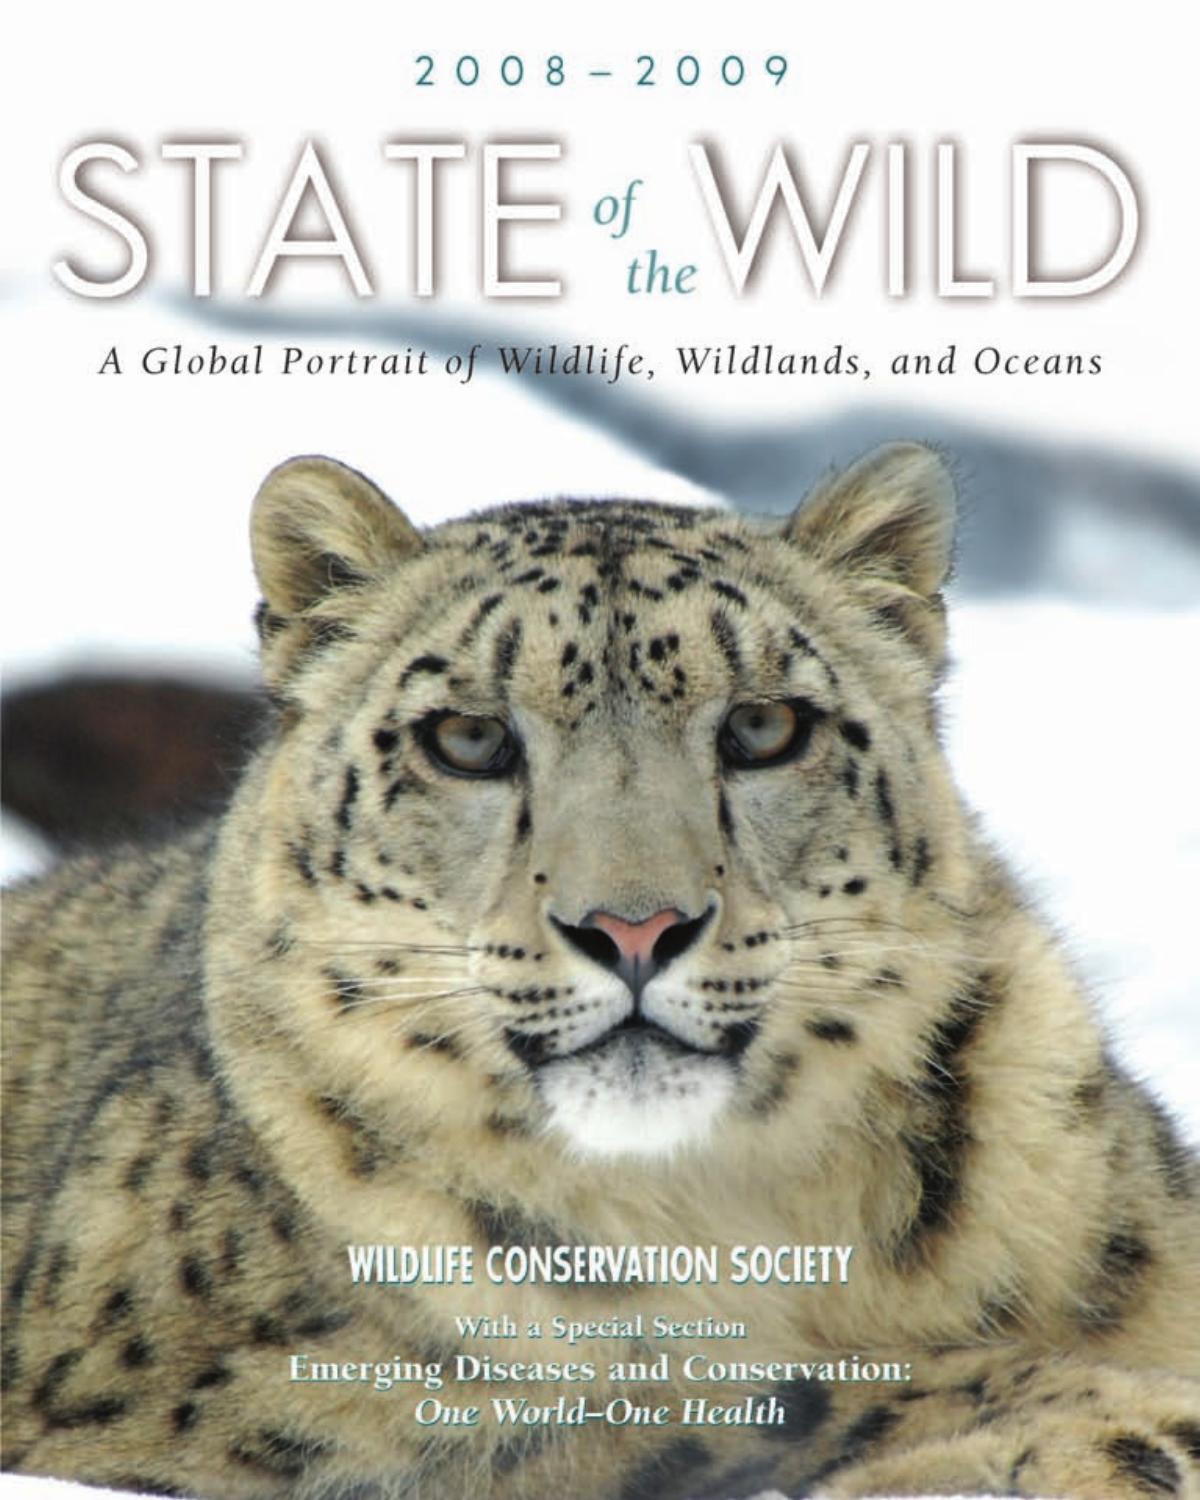 State of the Wild 2008-2009 : A Global Portrait of Wildlife, Wildlands, and Oceans by Eva Fearn; Ward Woods